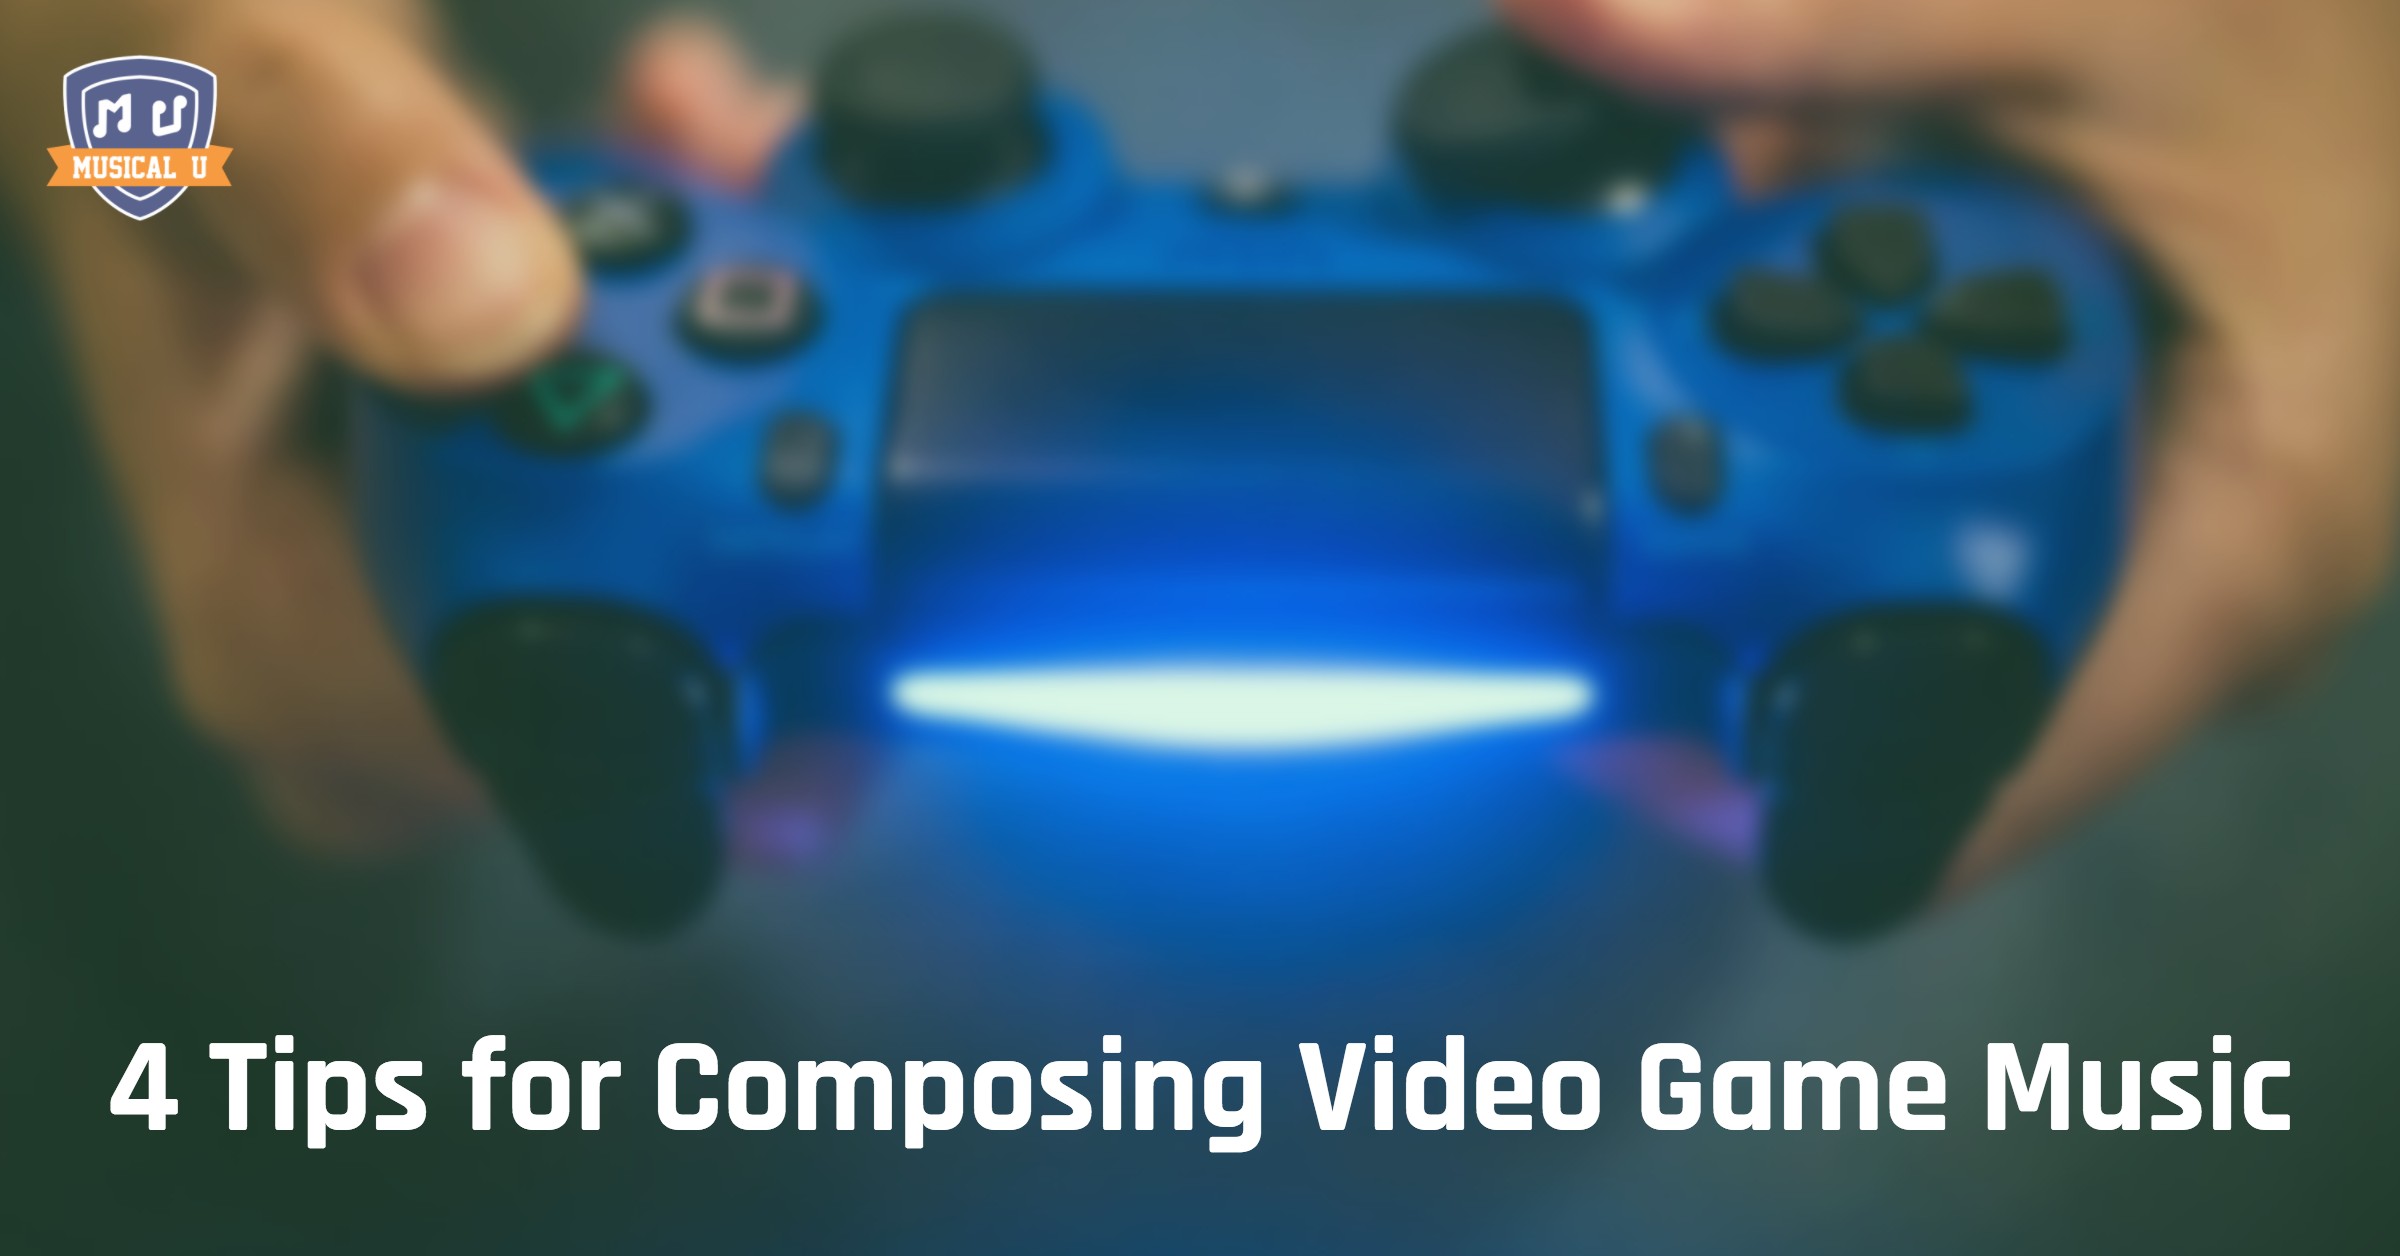 4 Tips for Composing Video Game Music